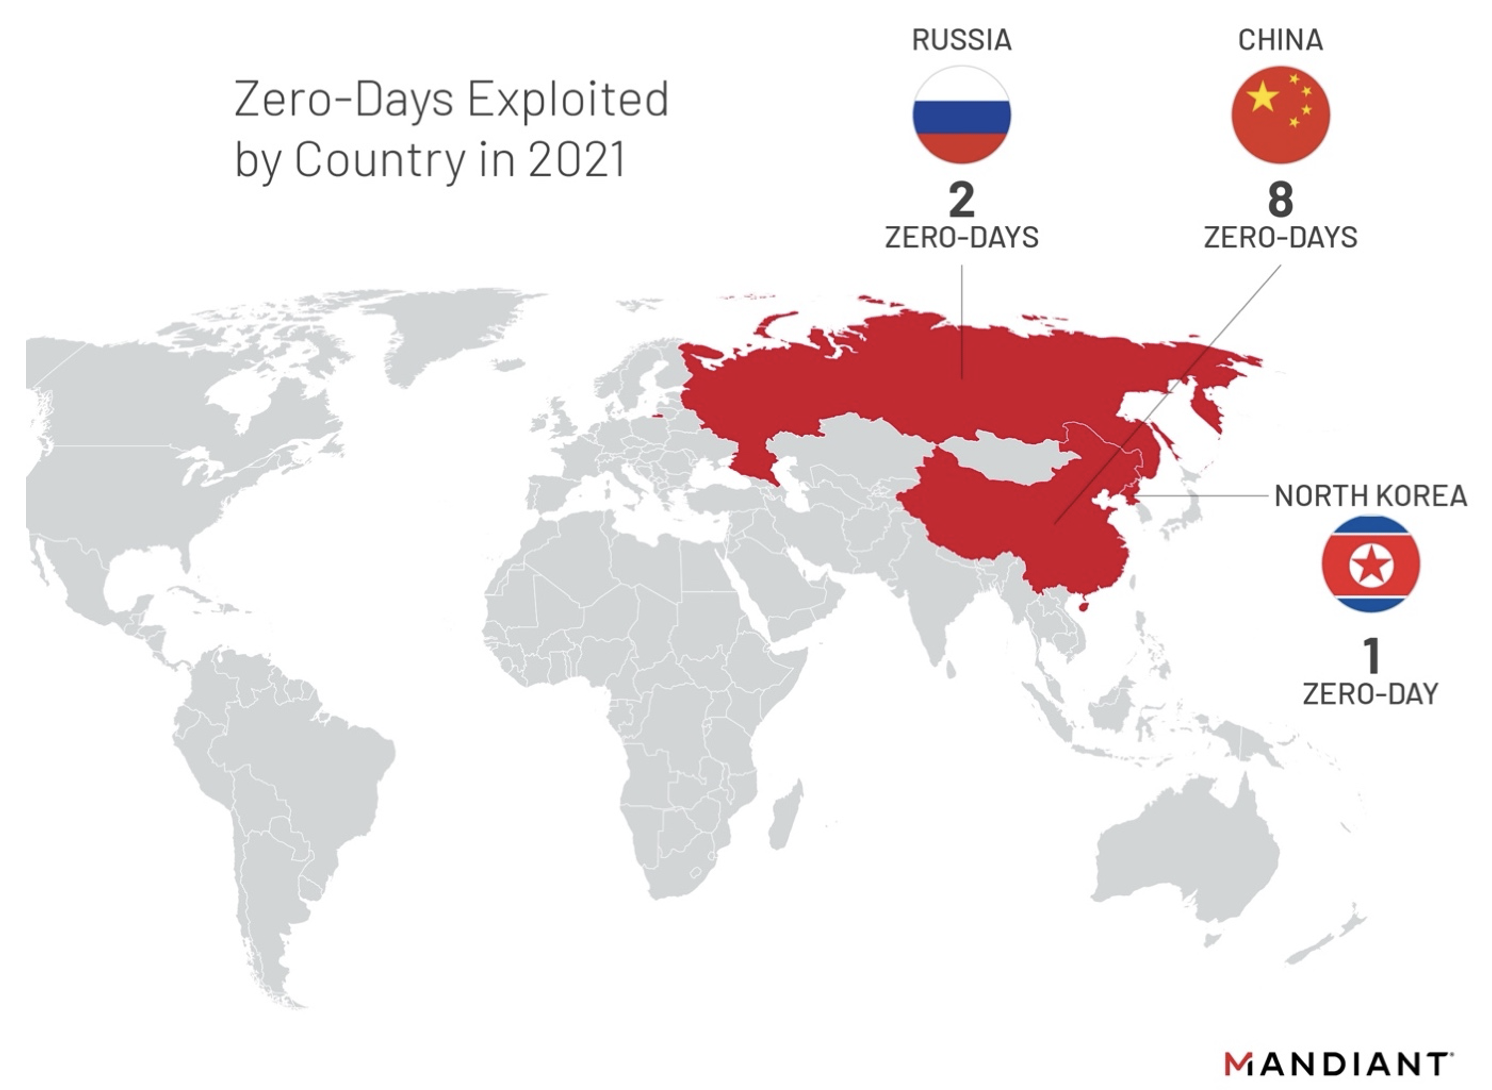 Actors exploiting zero-days in 2021 by country